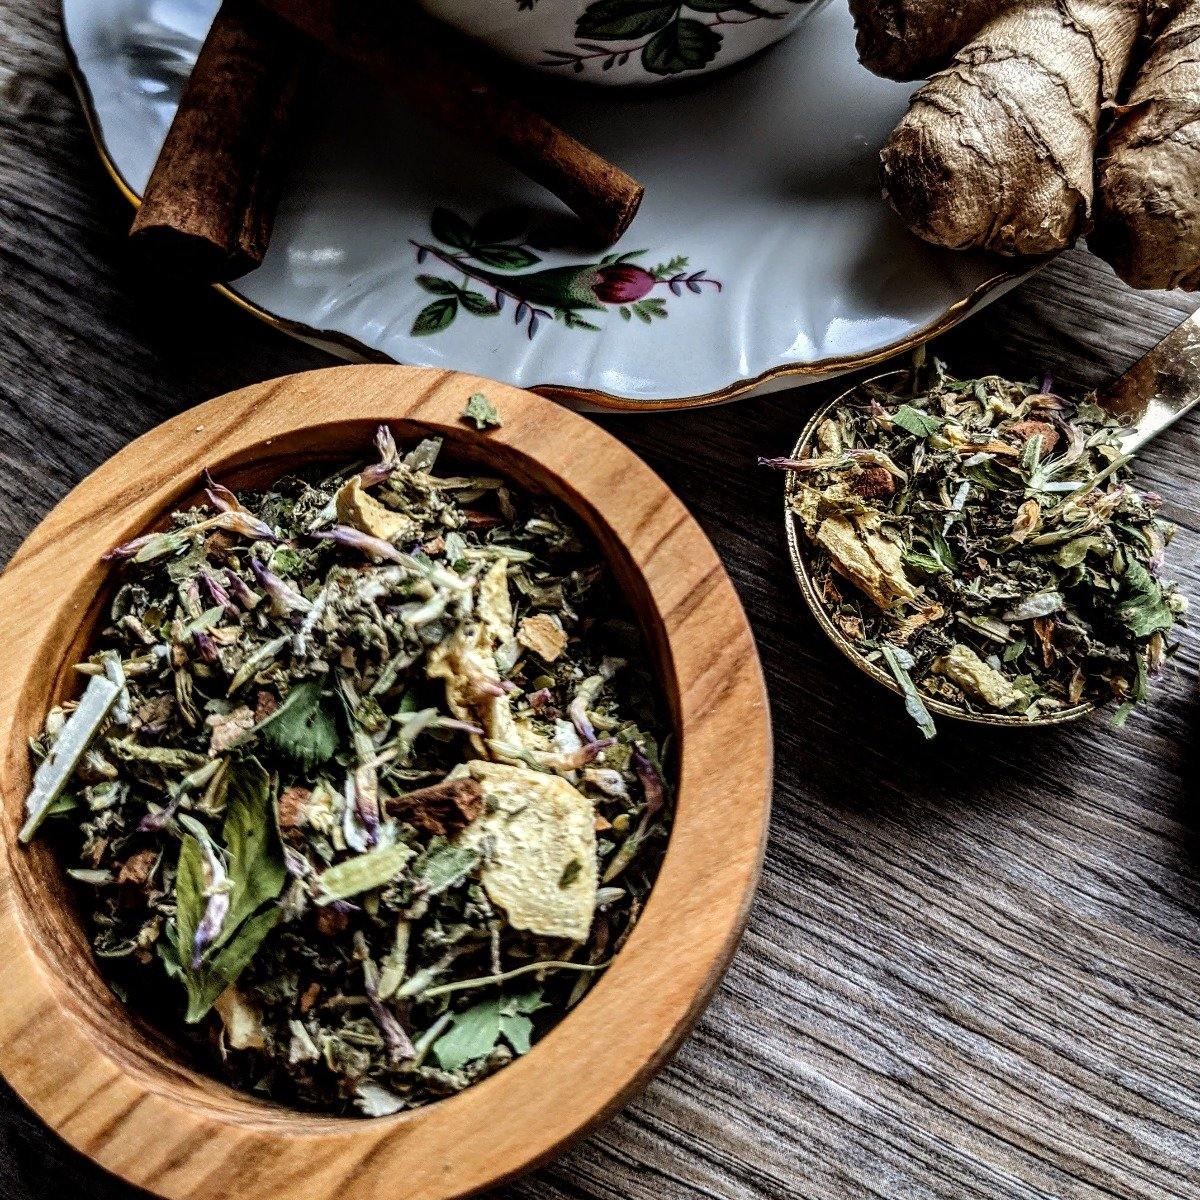 Moon Tea || Menstruation Cycle Support - The Rex Apothecary is now SPIRIT HAUS Botanicals